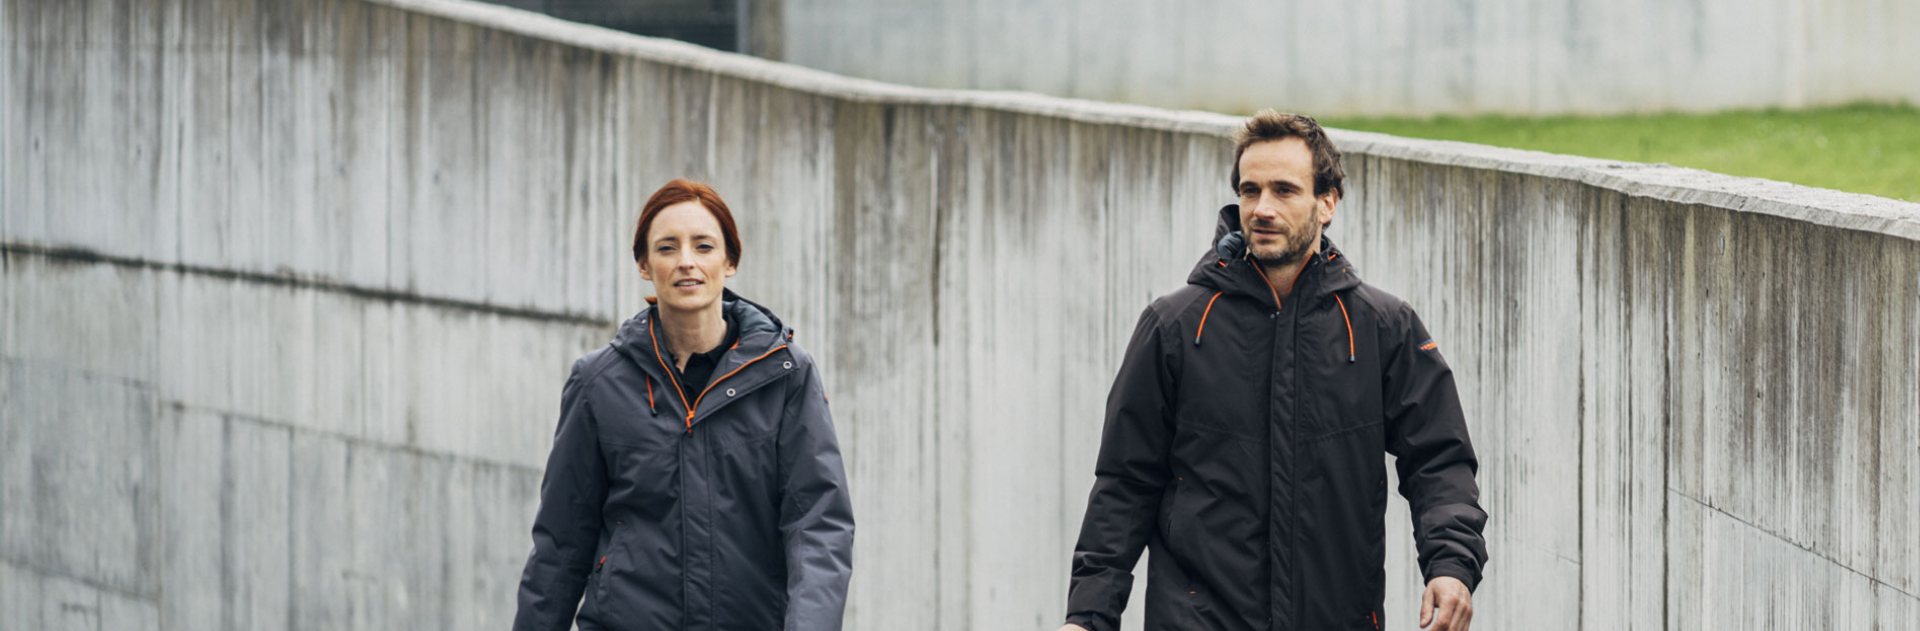 SUSTAINABLE WORKWEAR FOR COMMITTED COMPANIES